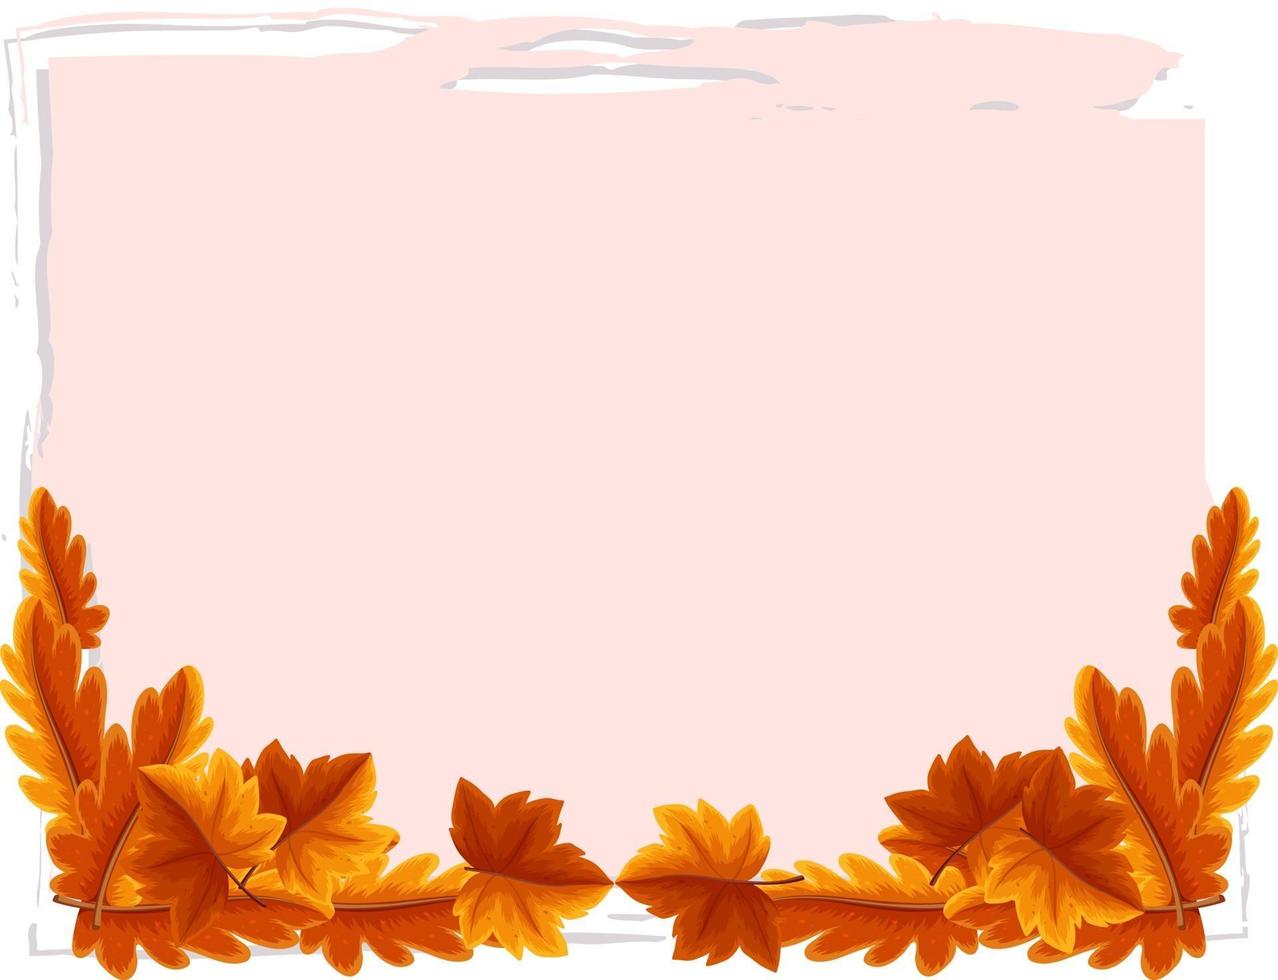 Empty banner with autumn leaves elements on white background vector